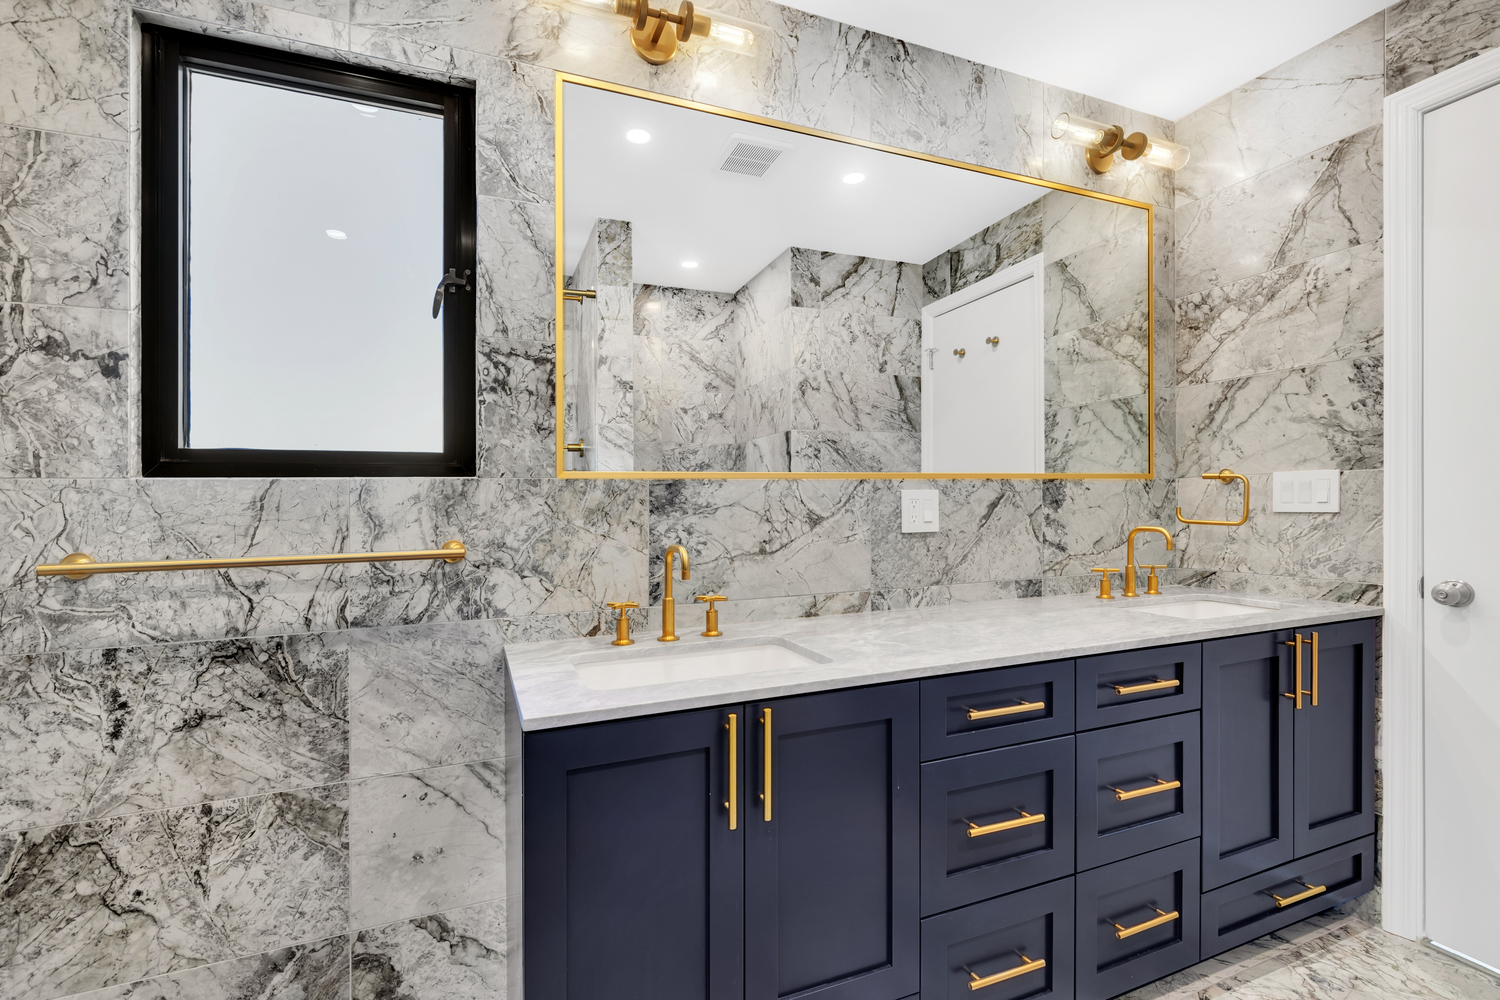 Remodeled bathroom with dark blue cabinetry and gold trim